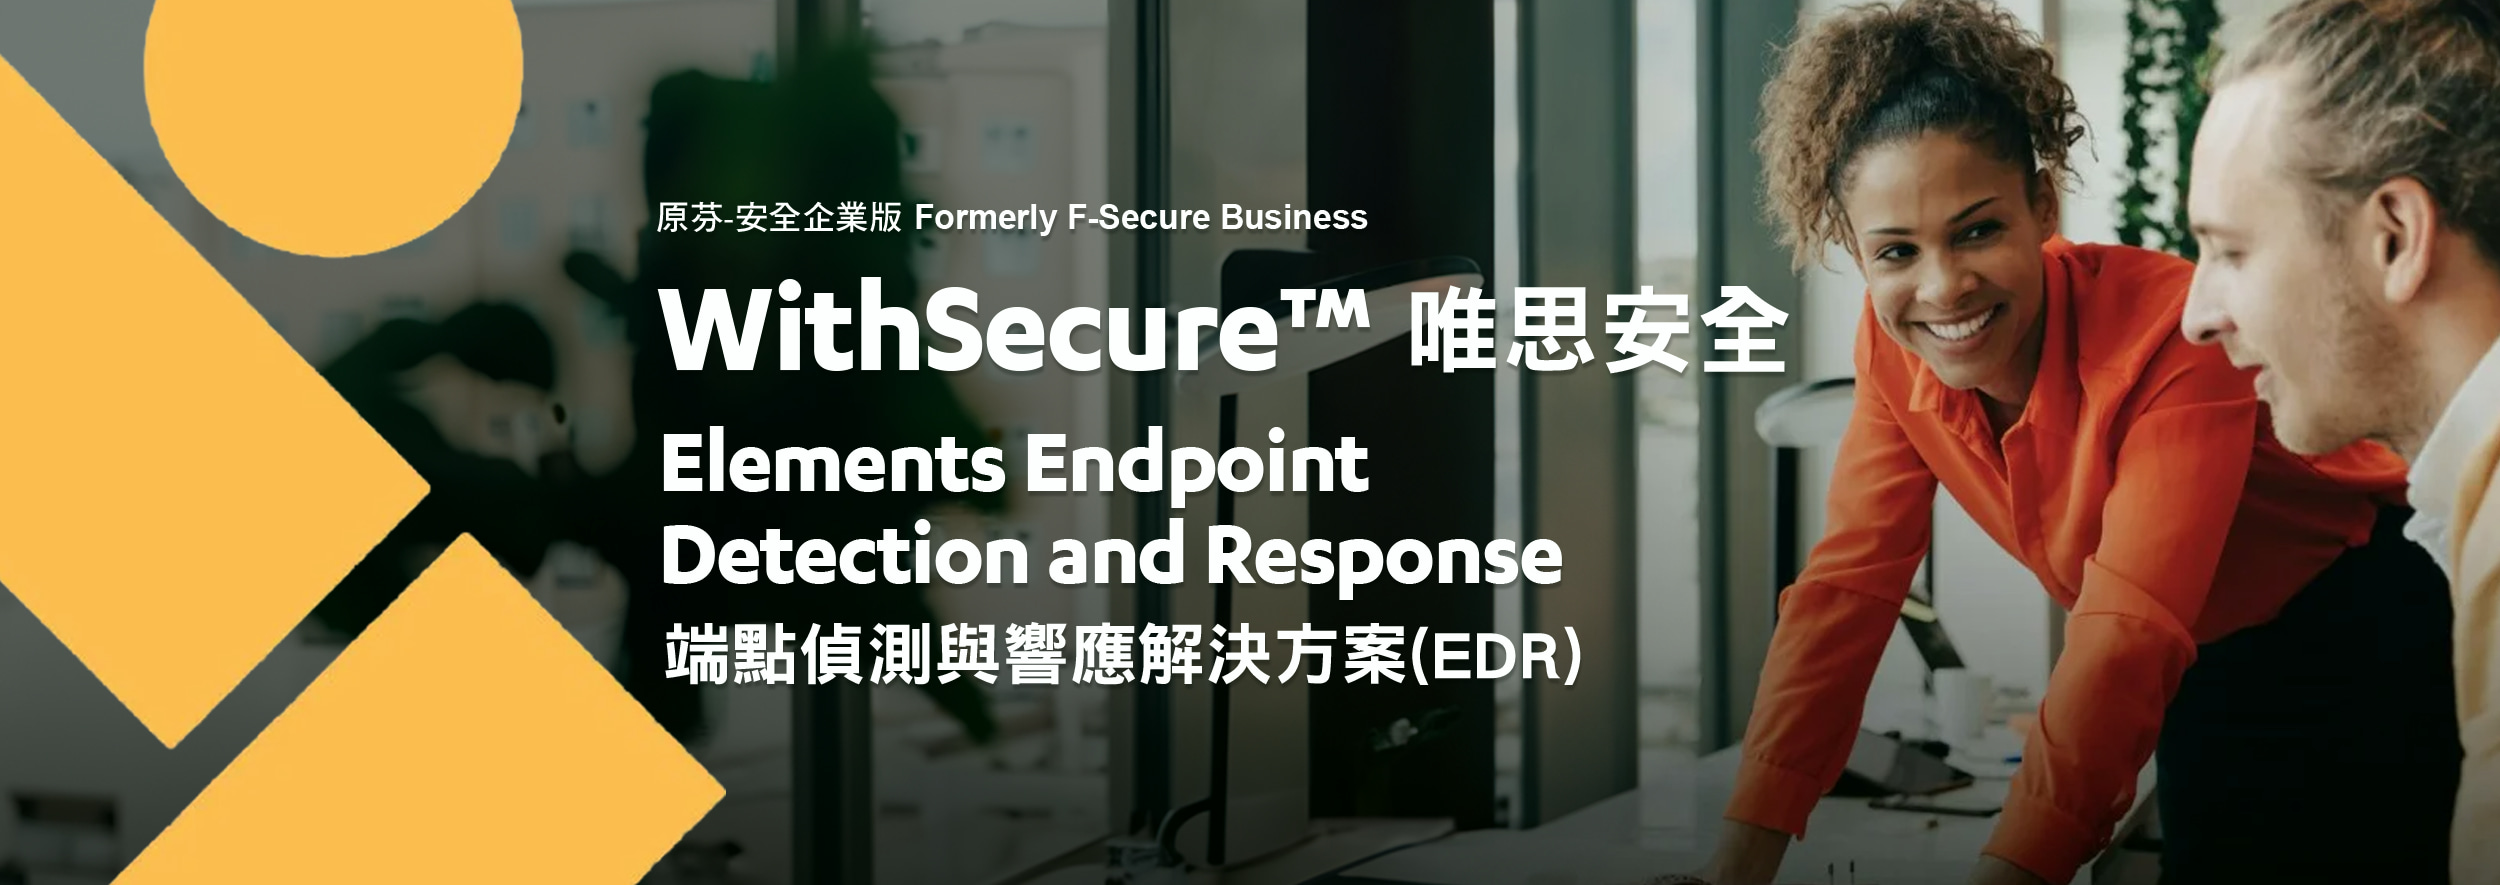 WithSecure EDR